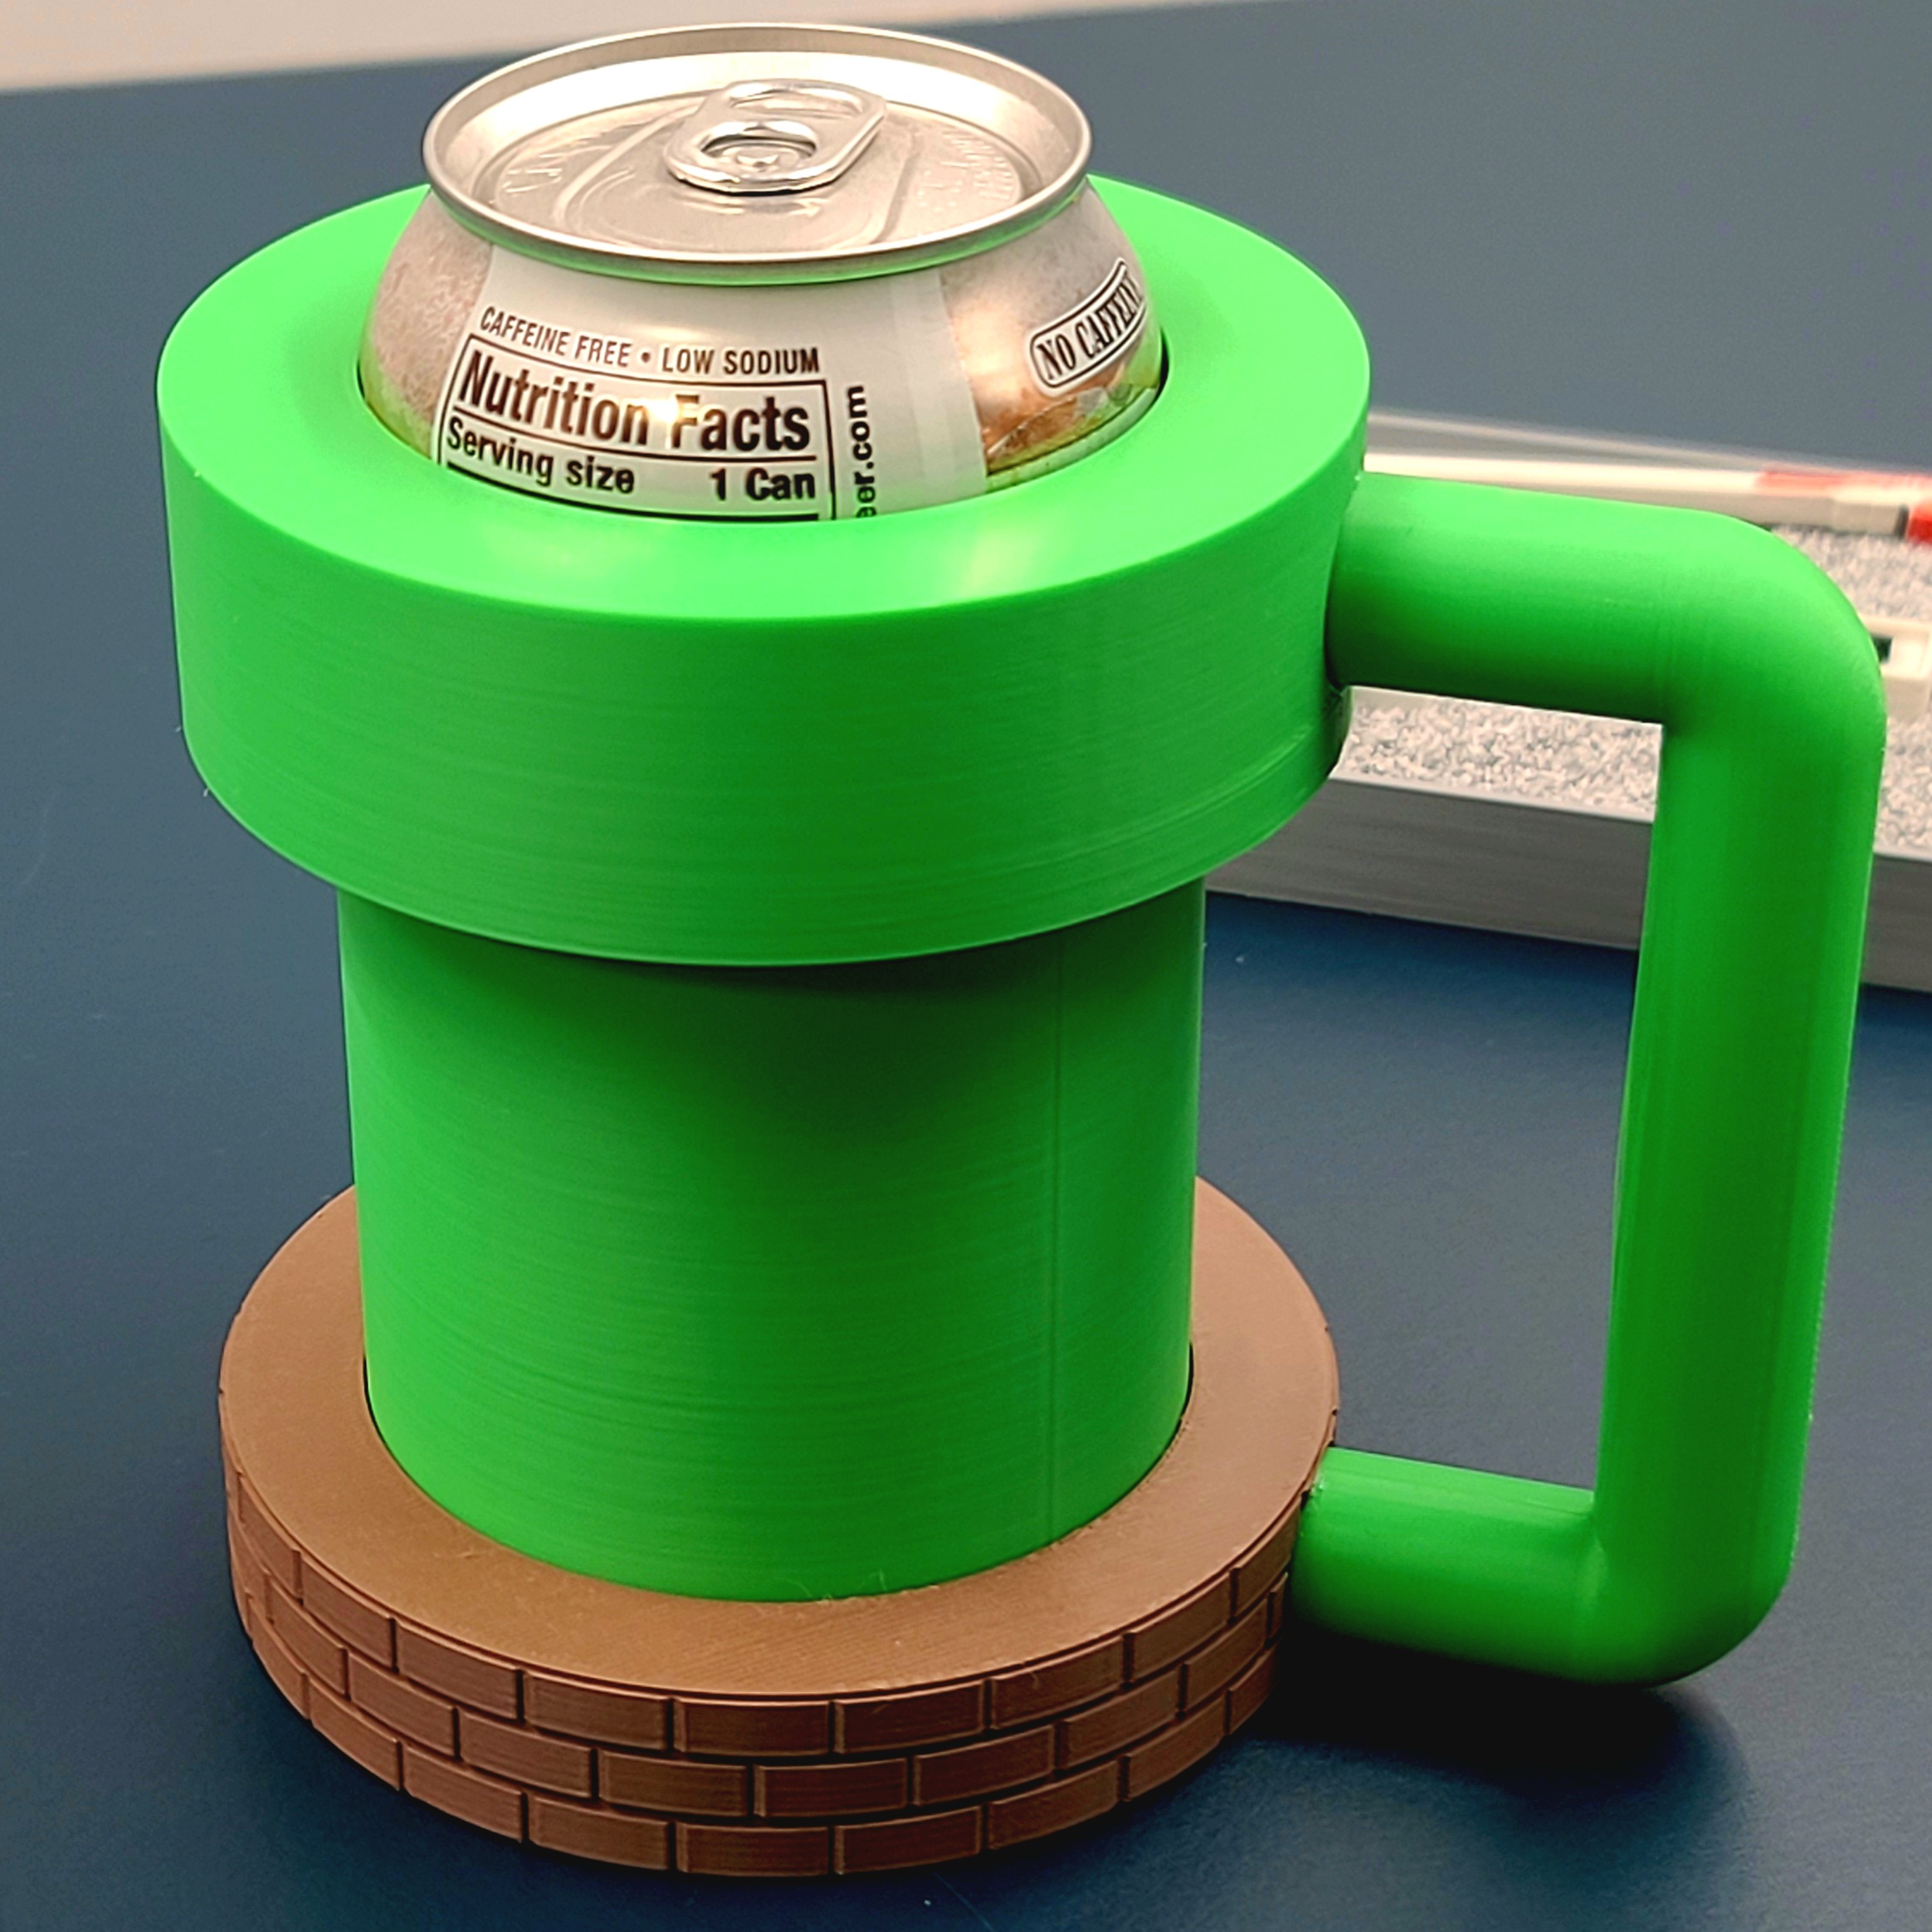 pipe-coozie-video-game-inspired-beverage-coozie-can-size-by-makers